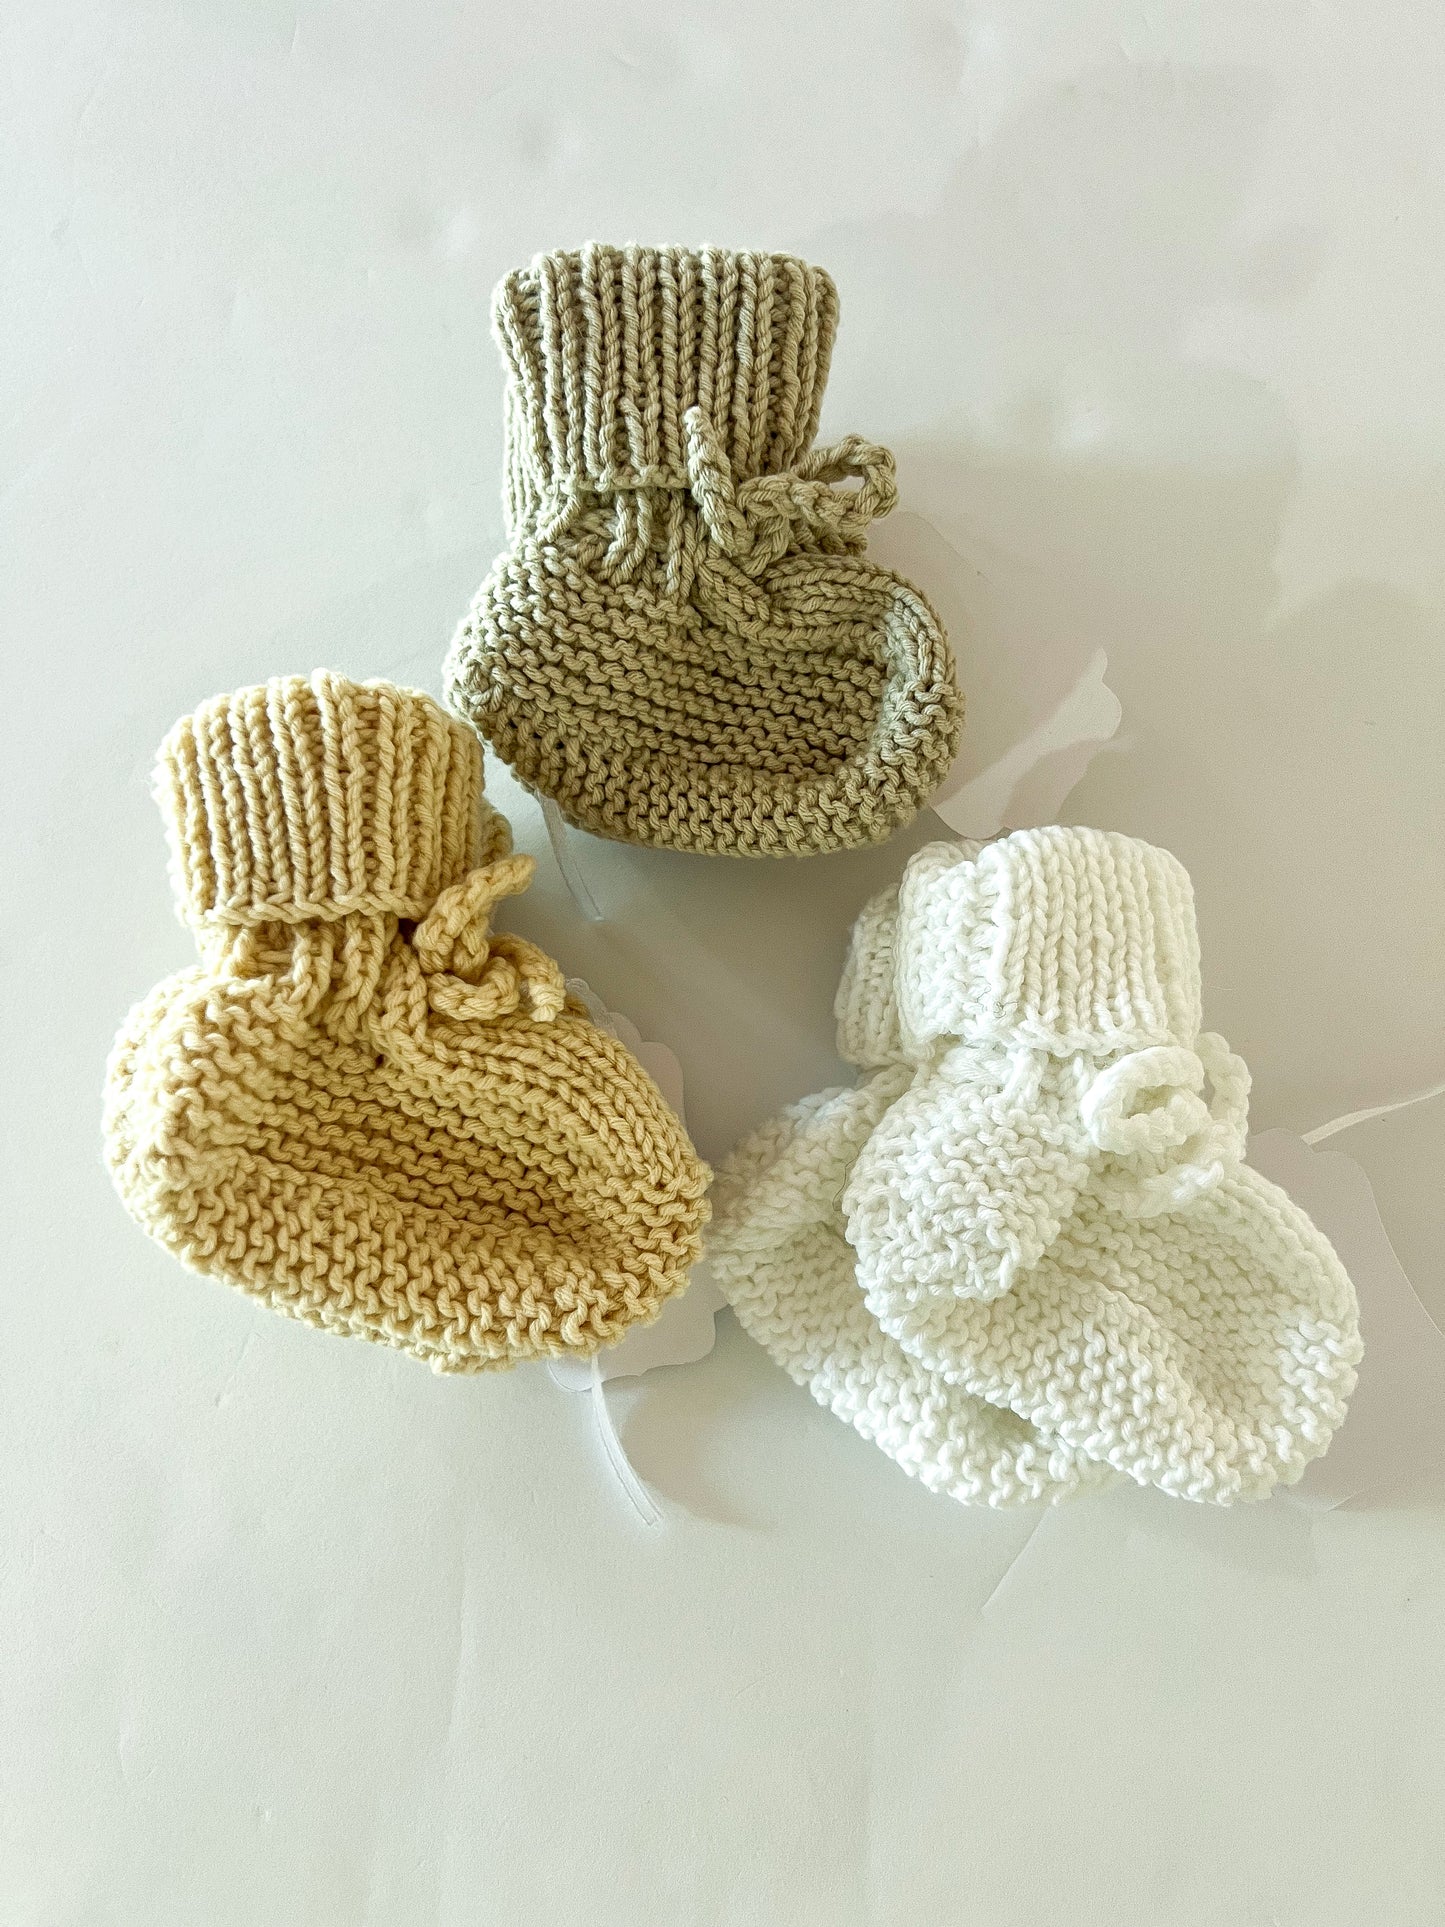 Hand Knitted - Newborn Baby Slippers - 100% Organic Cotton (3 Colors)